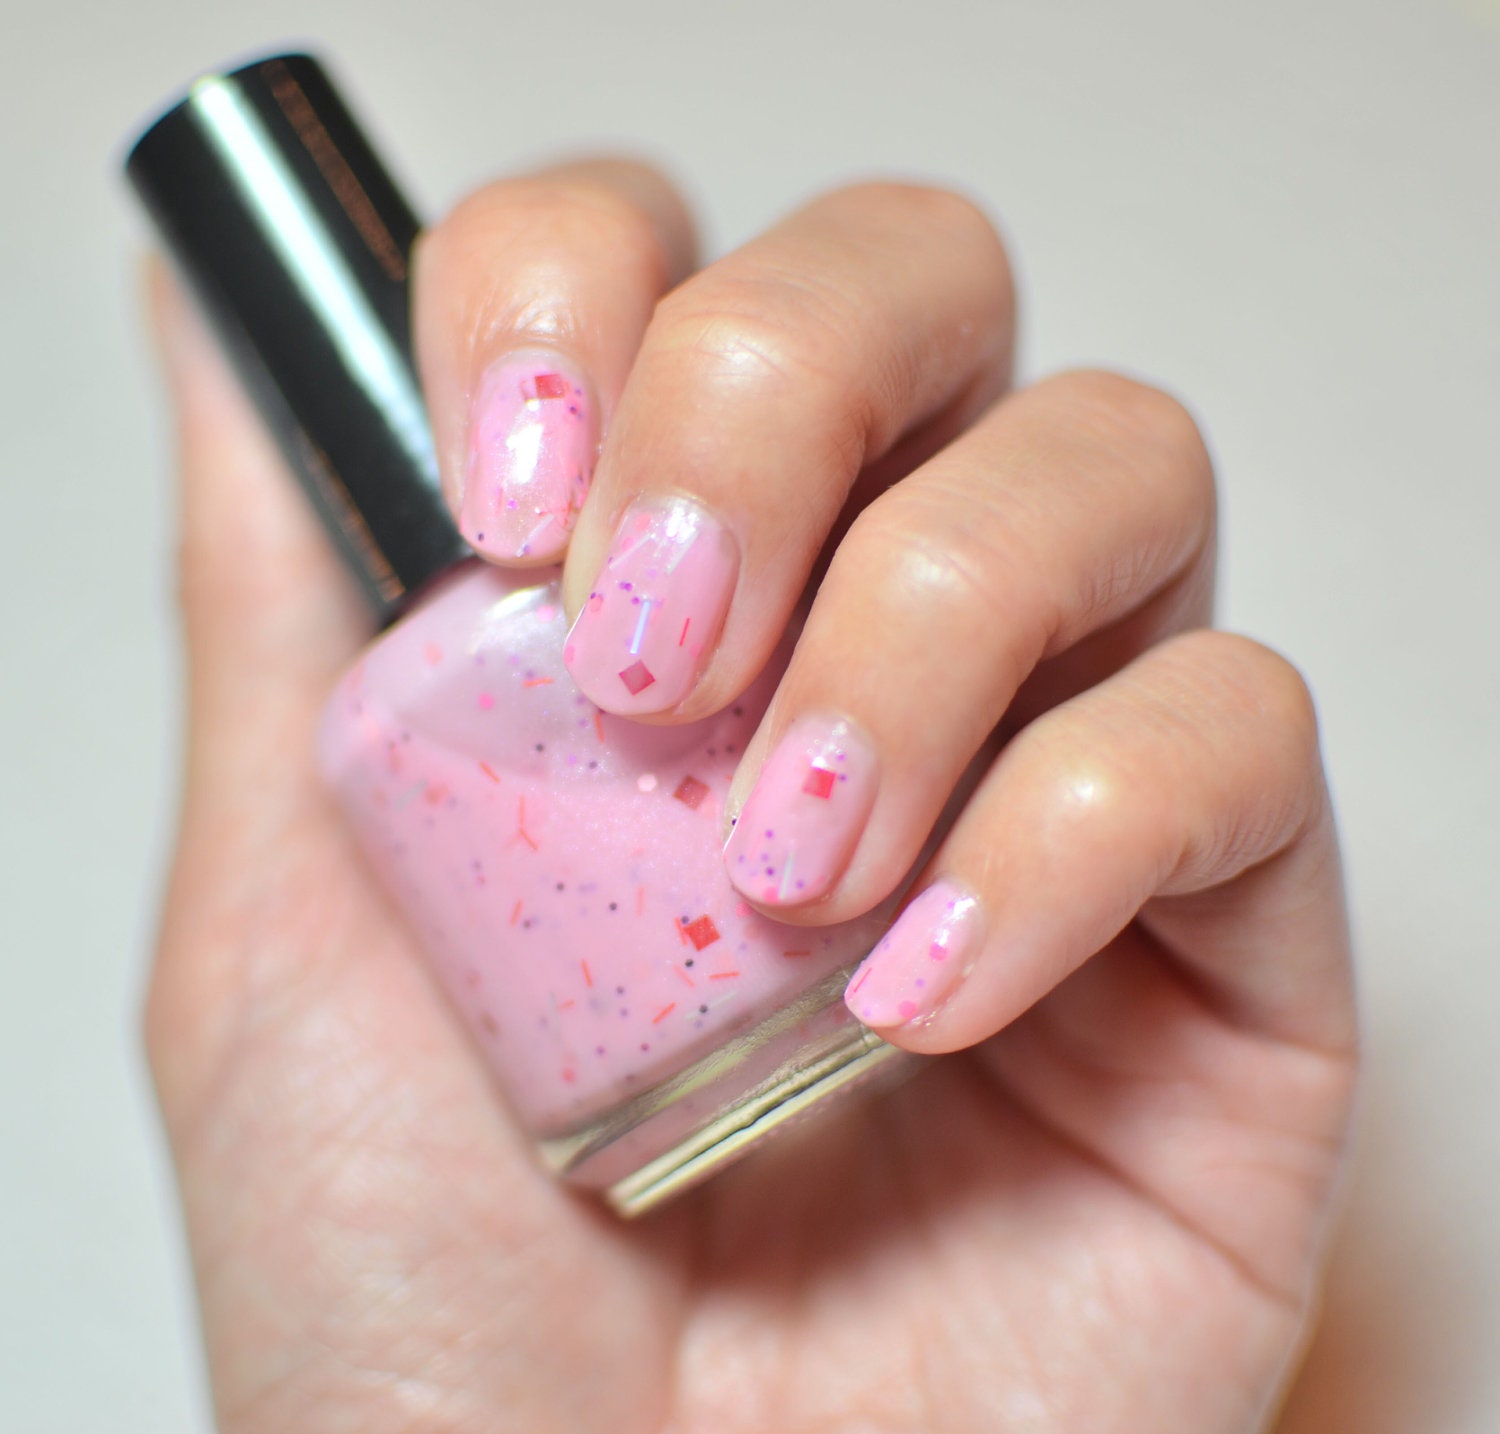 Nail Polish: Fairy Floss - Milky Cotton Candy Pink with Glitters